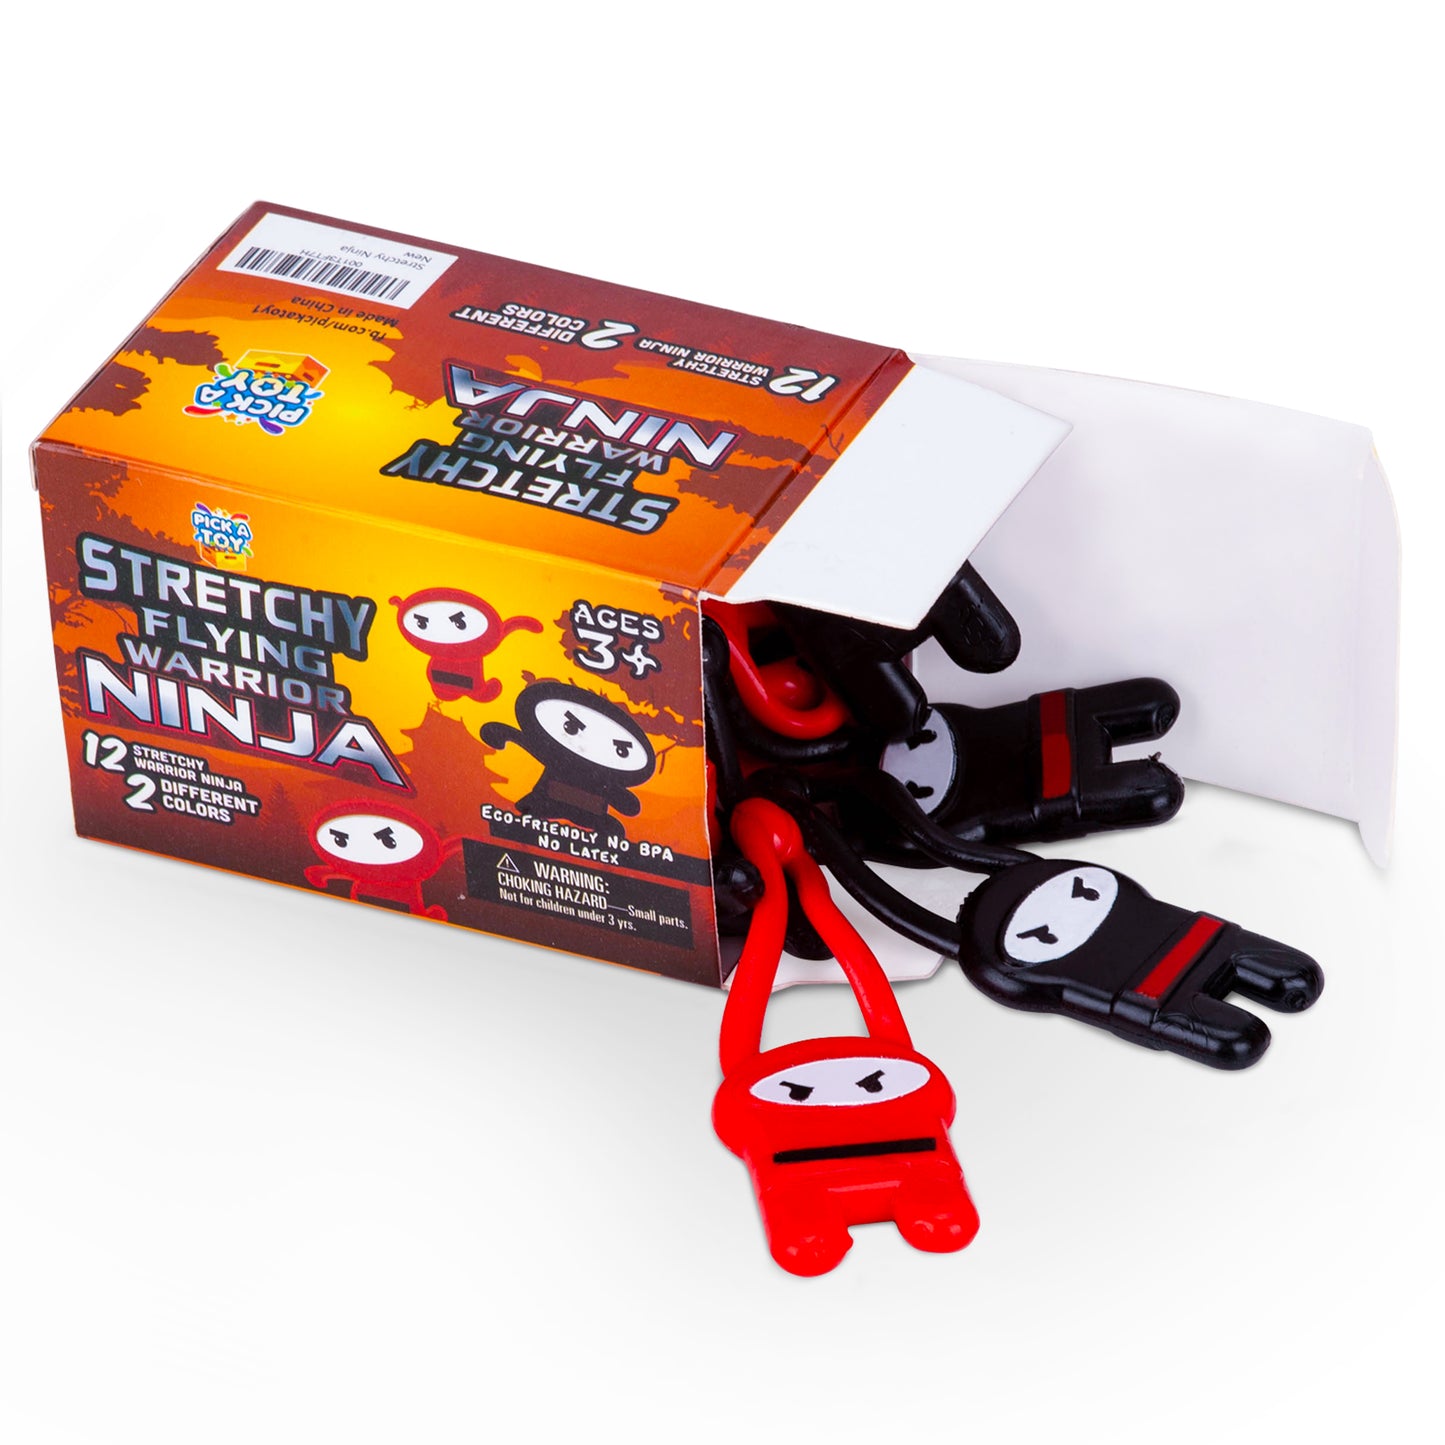 Stretchy Flying Ninjas By Pick A Toy [12-Pieces] - Pick A Toy